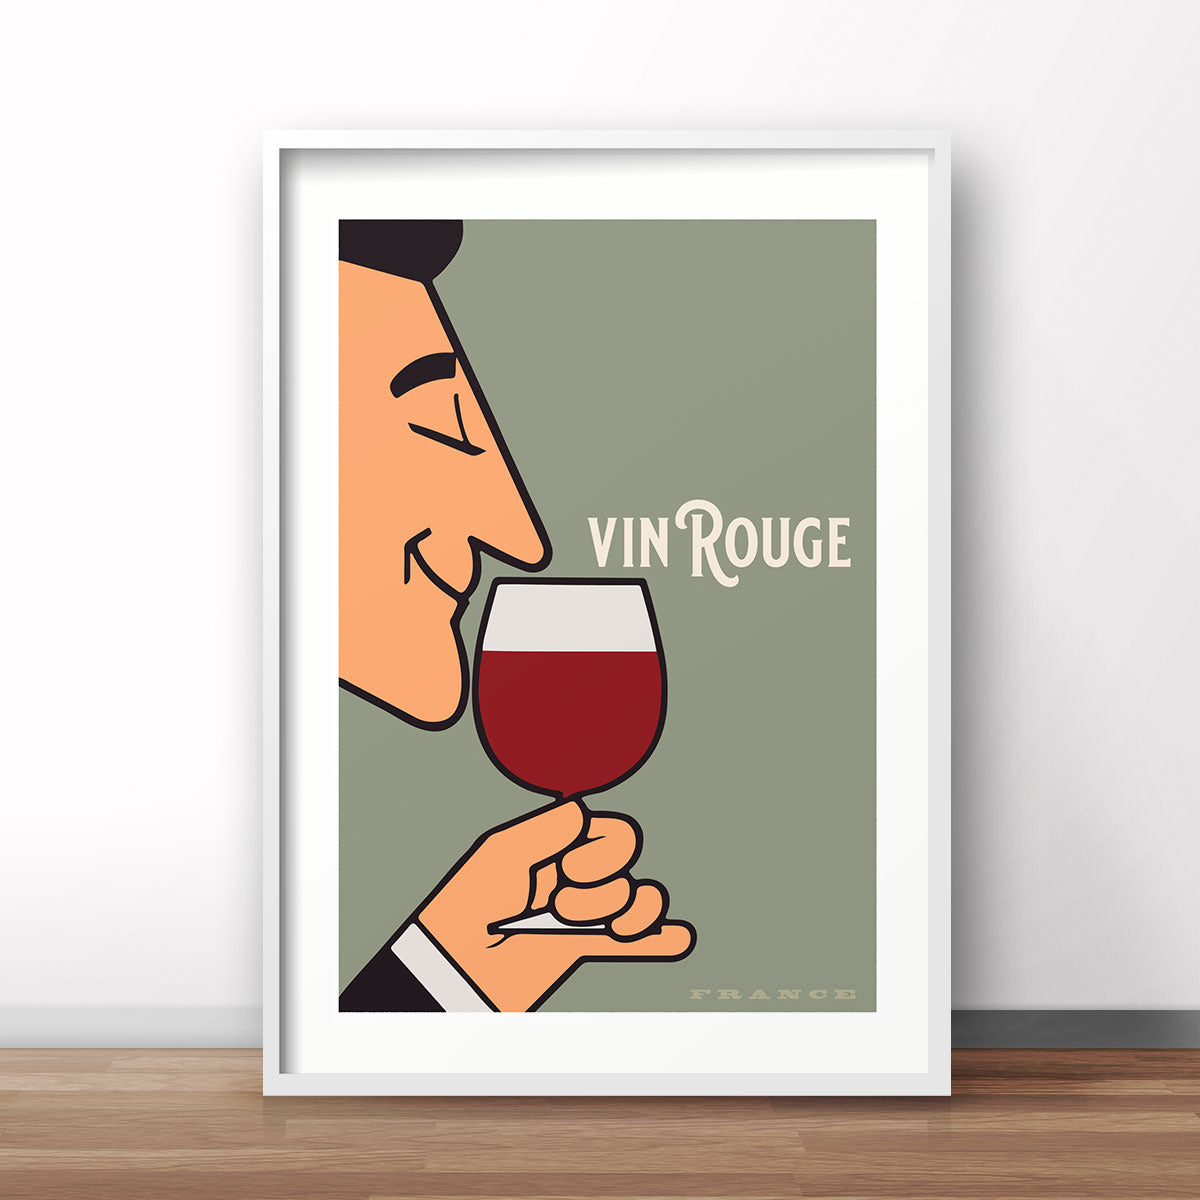 Vin Rouge France vintage retro poster print from Places we luv